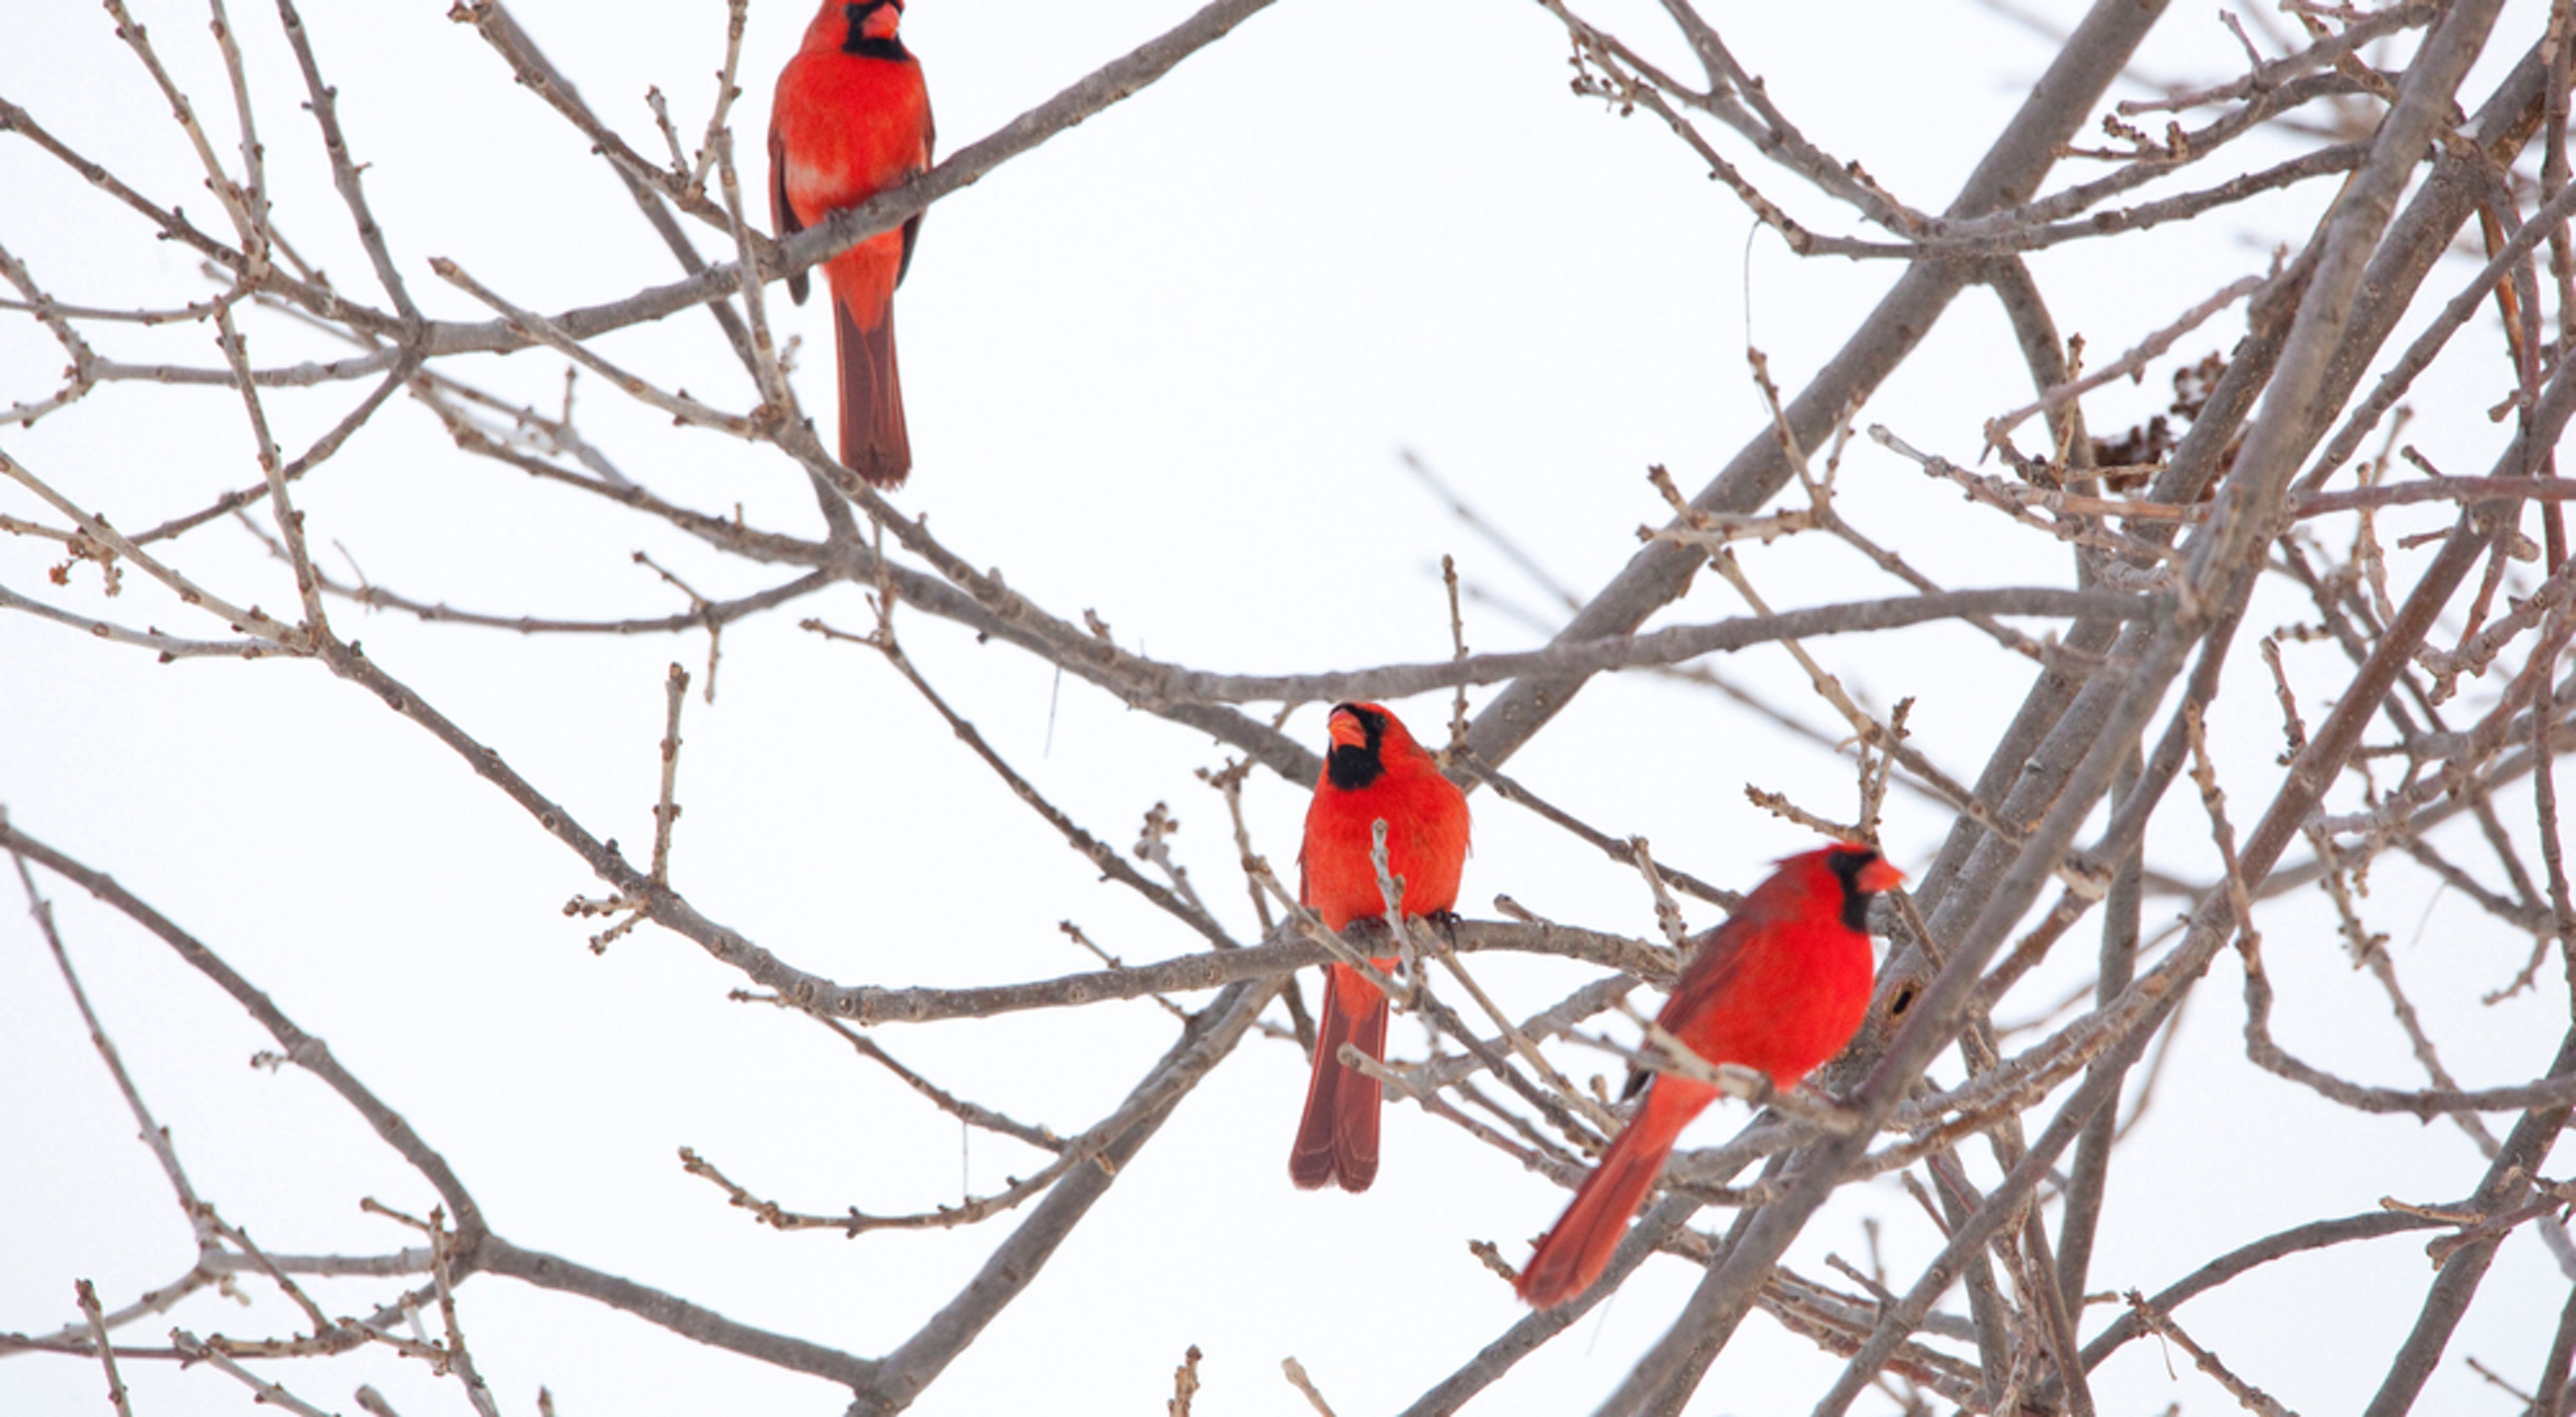 The crimson red male cardinals are perched in a snow covered tree. 